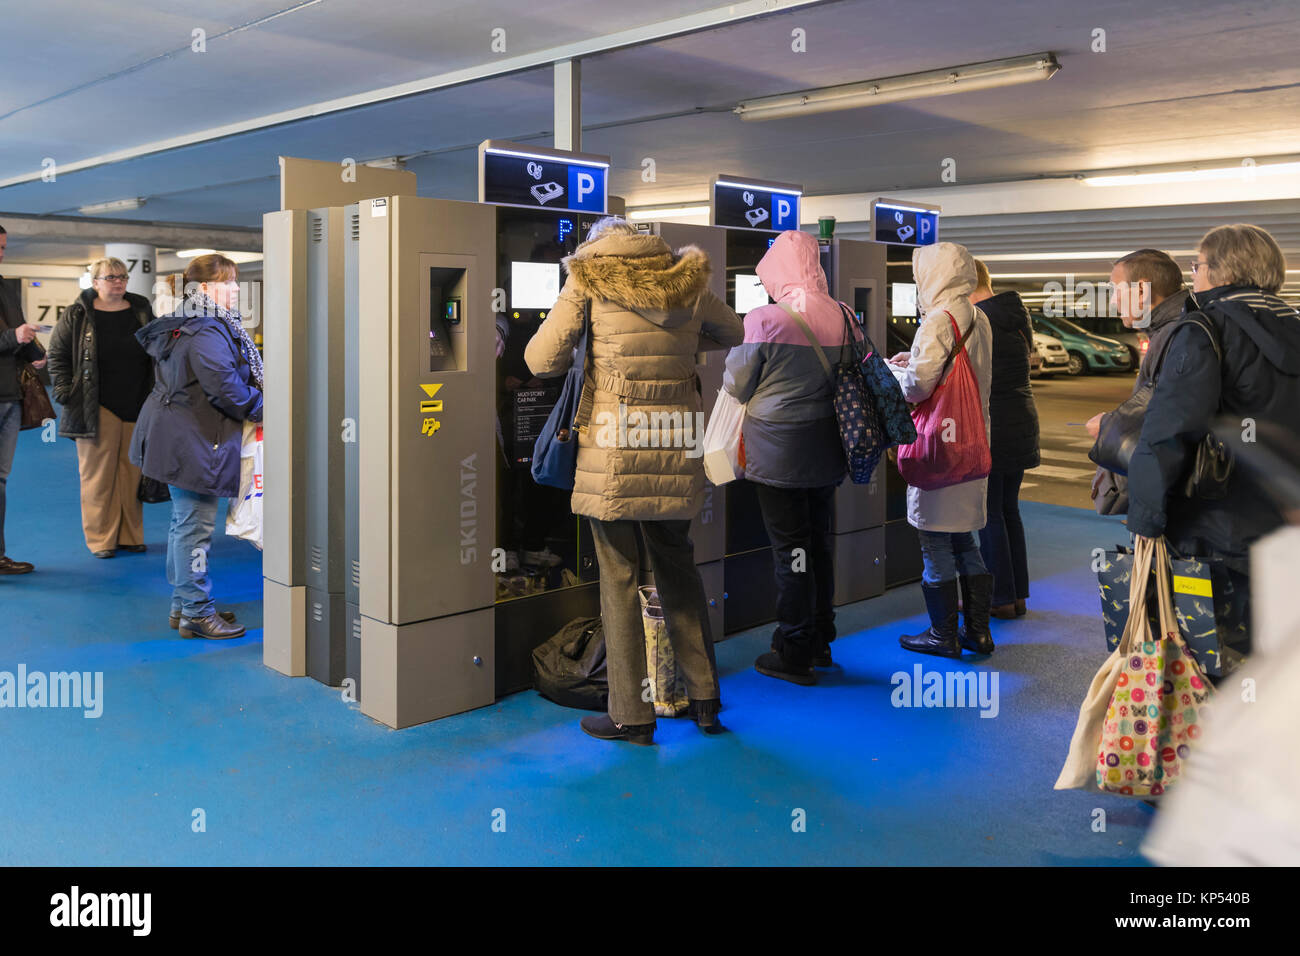 Queue of people in a multi-storey car park in the UK waiting to buy a ticket from parking ticket machines. Stock Photo